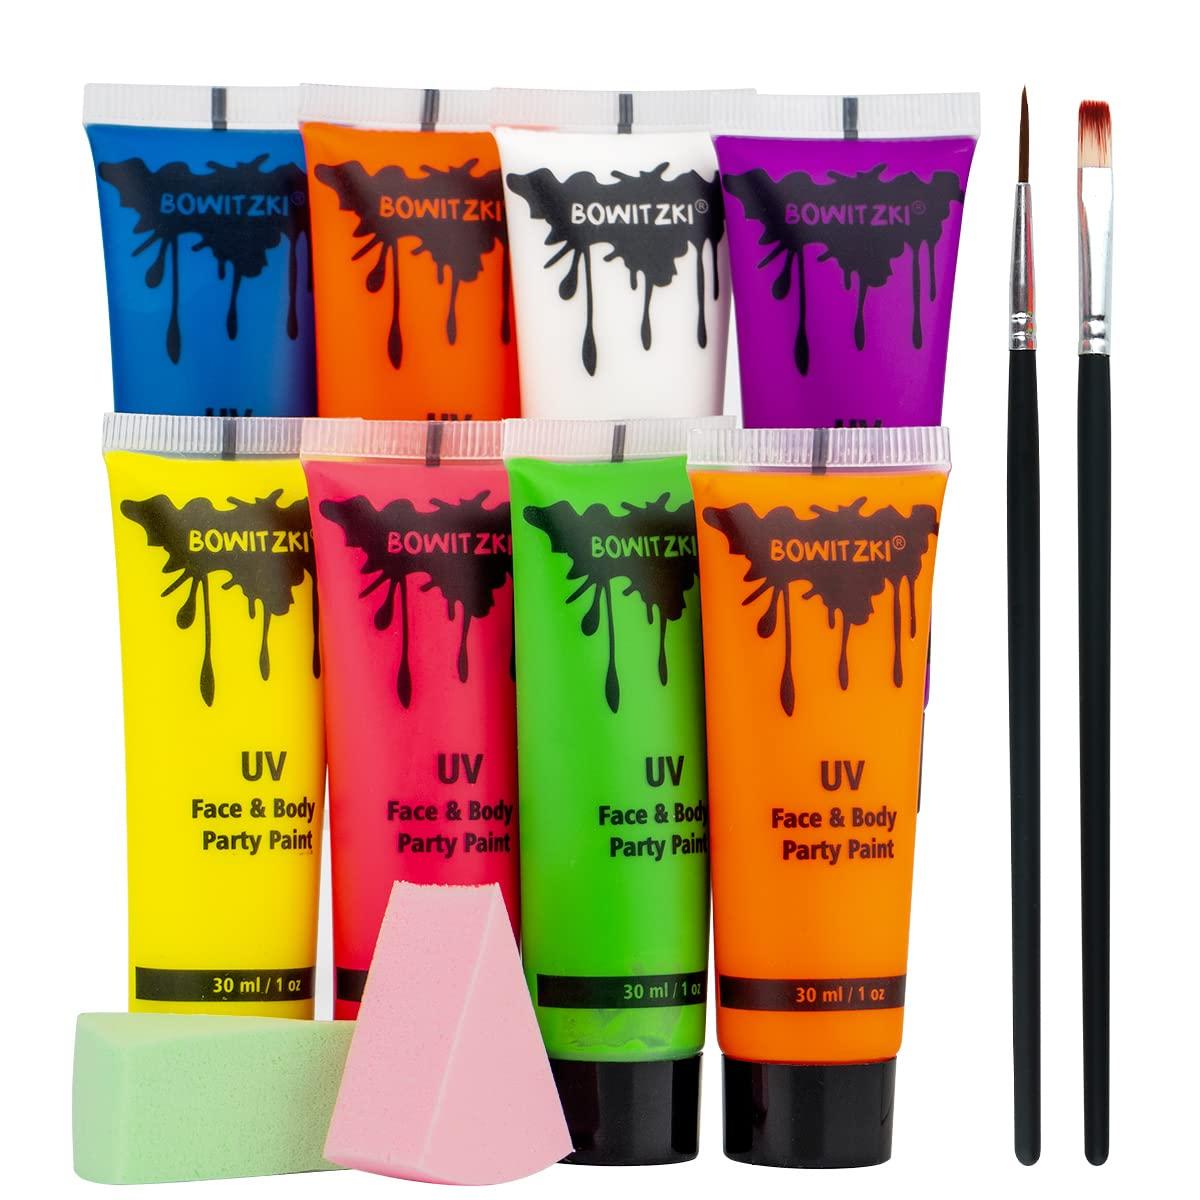 UV Neon Face & Body Paint Glow Kit 6 Bottles 2 Oz. Each Top Rated